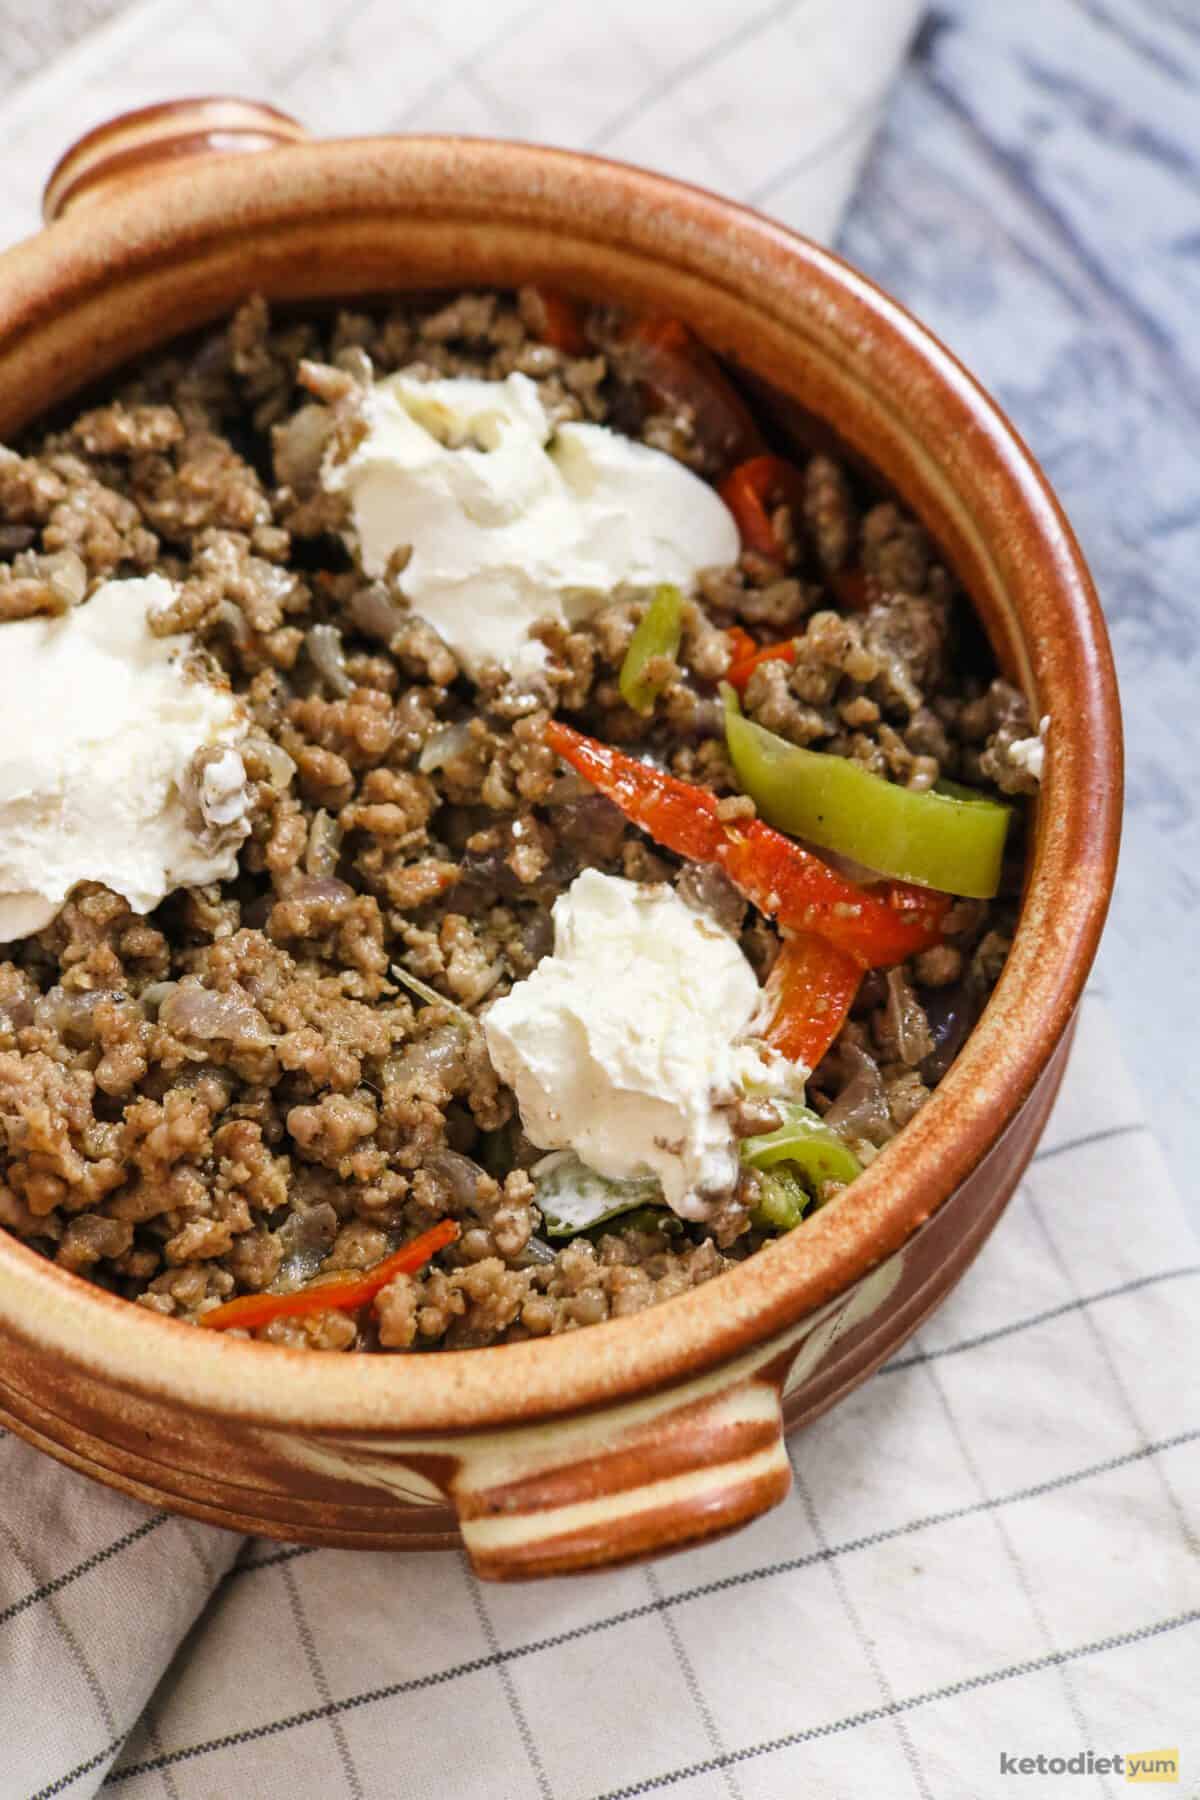 Brown casserole dish filled with ground beef, red peppers, green peppers and dollops of cream cheese on a tablecloth